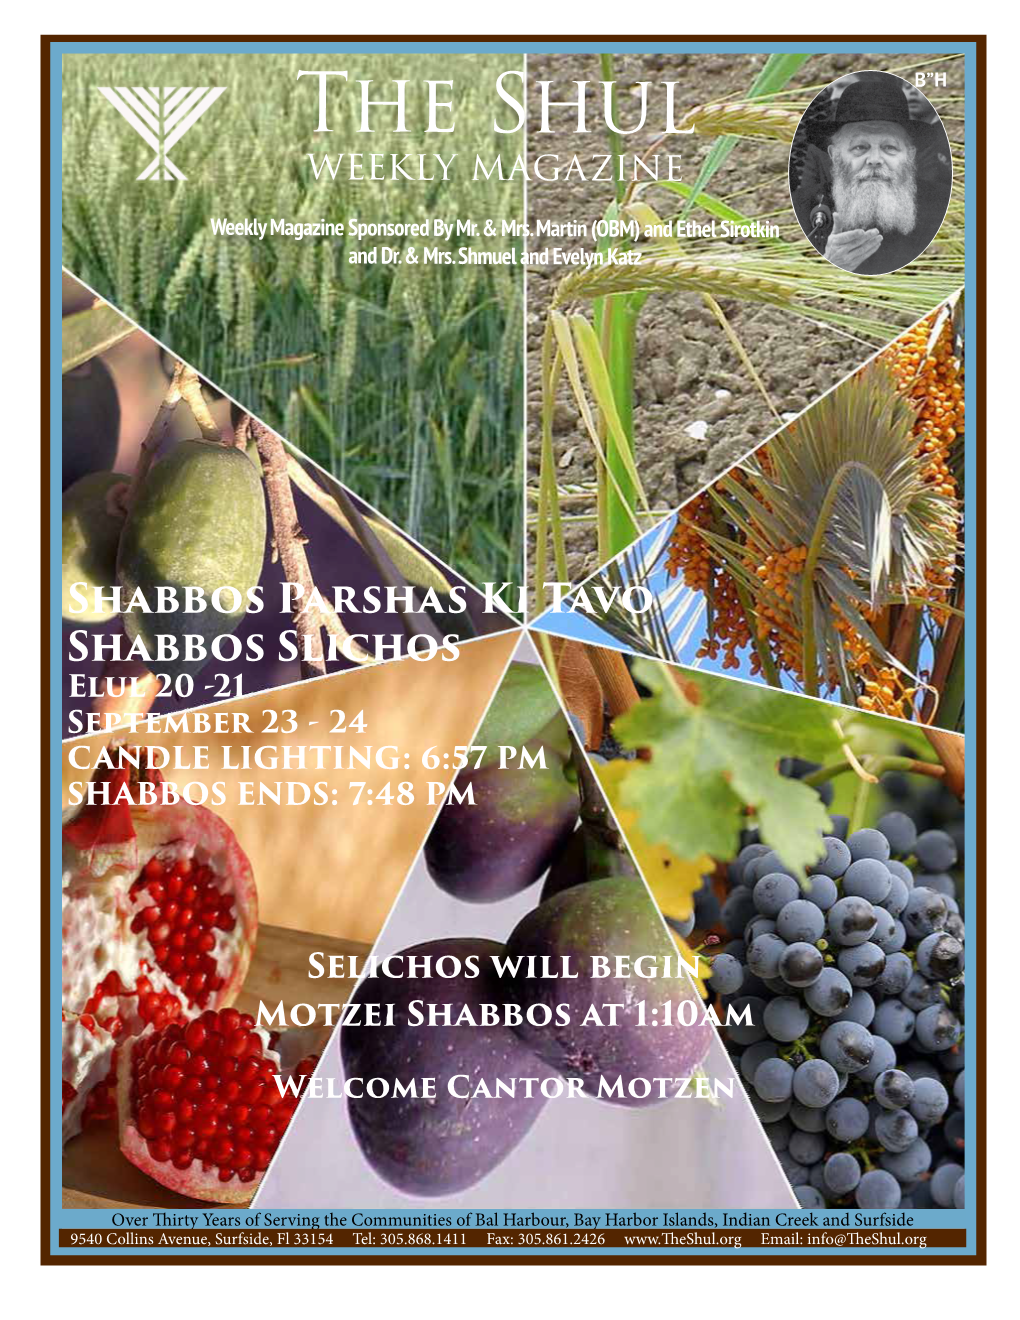 Shabbos Schedules, Classes, Articles and More